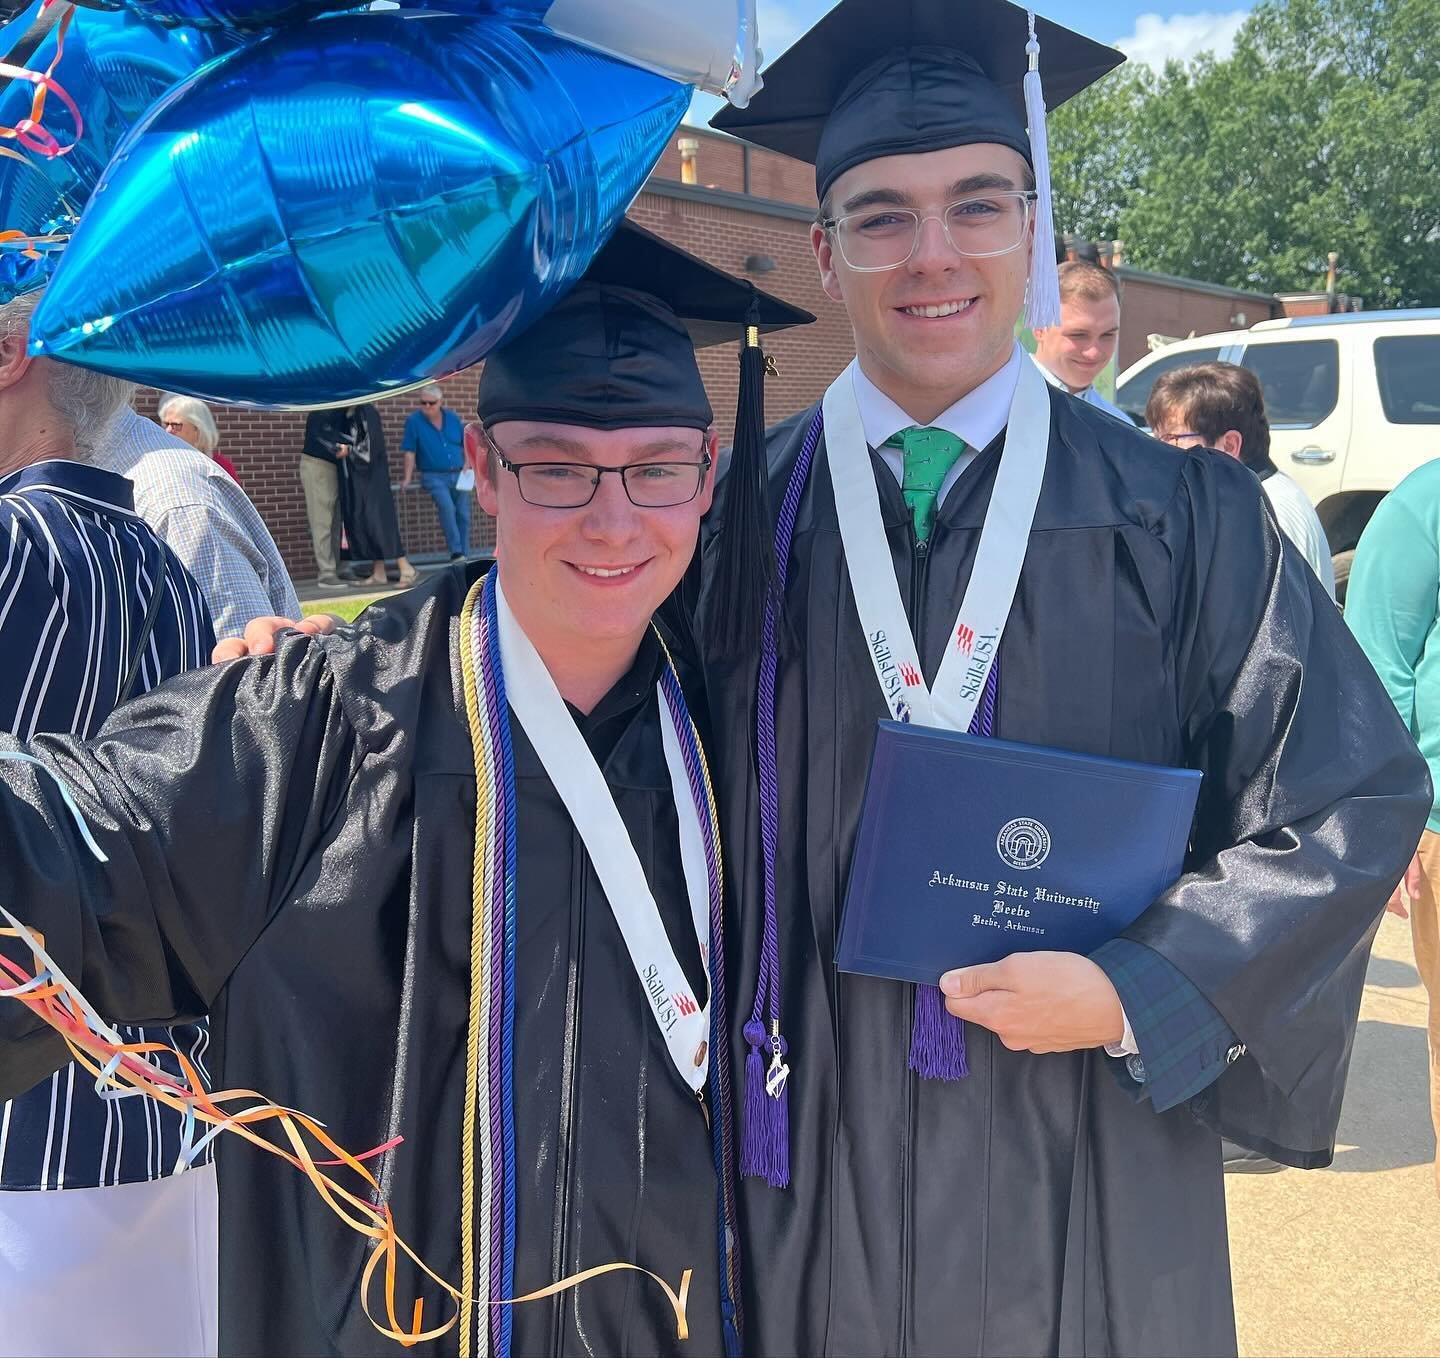 🎓 CONGRATULATIONS to Hannidy Mills and Jared Scheel, graduating today with honors ⭐️from Arkansas State University, completing the Power Sports Program. 🎓🤗 &ldquo;We are proud of the young men they have become and we celebrate their achievements. 